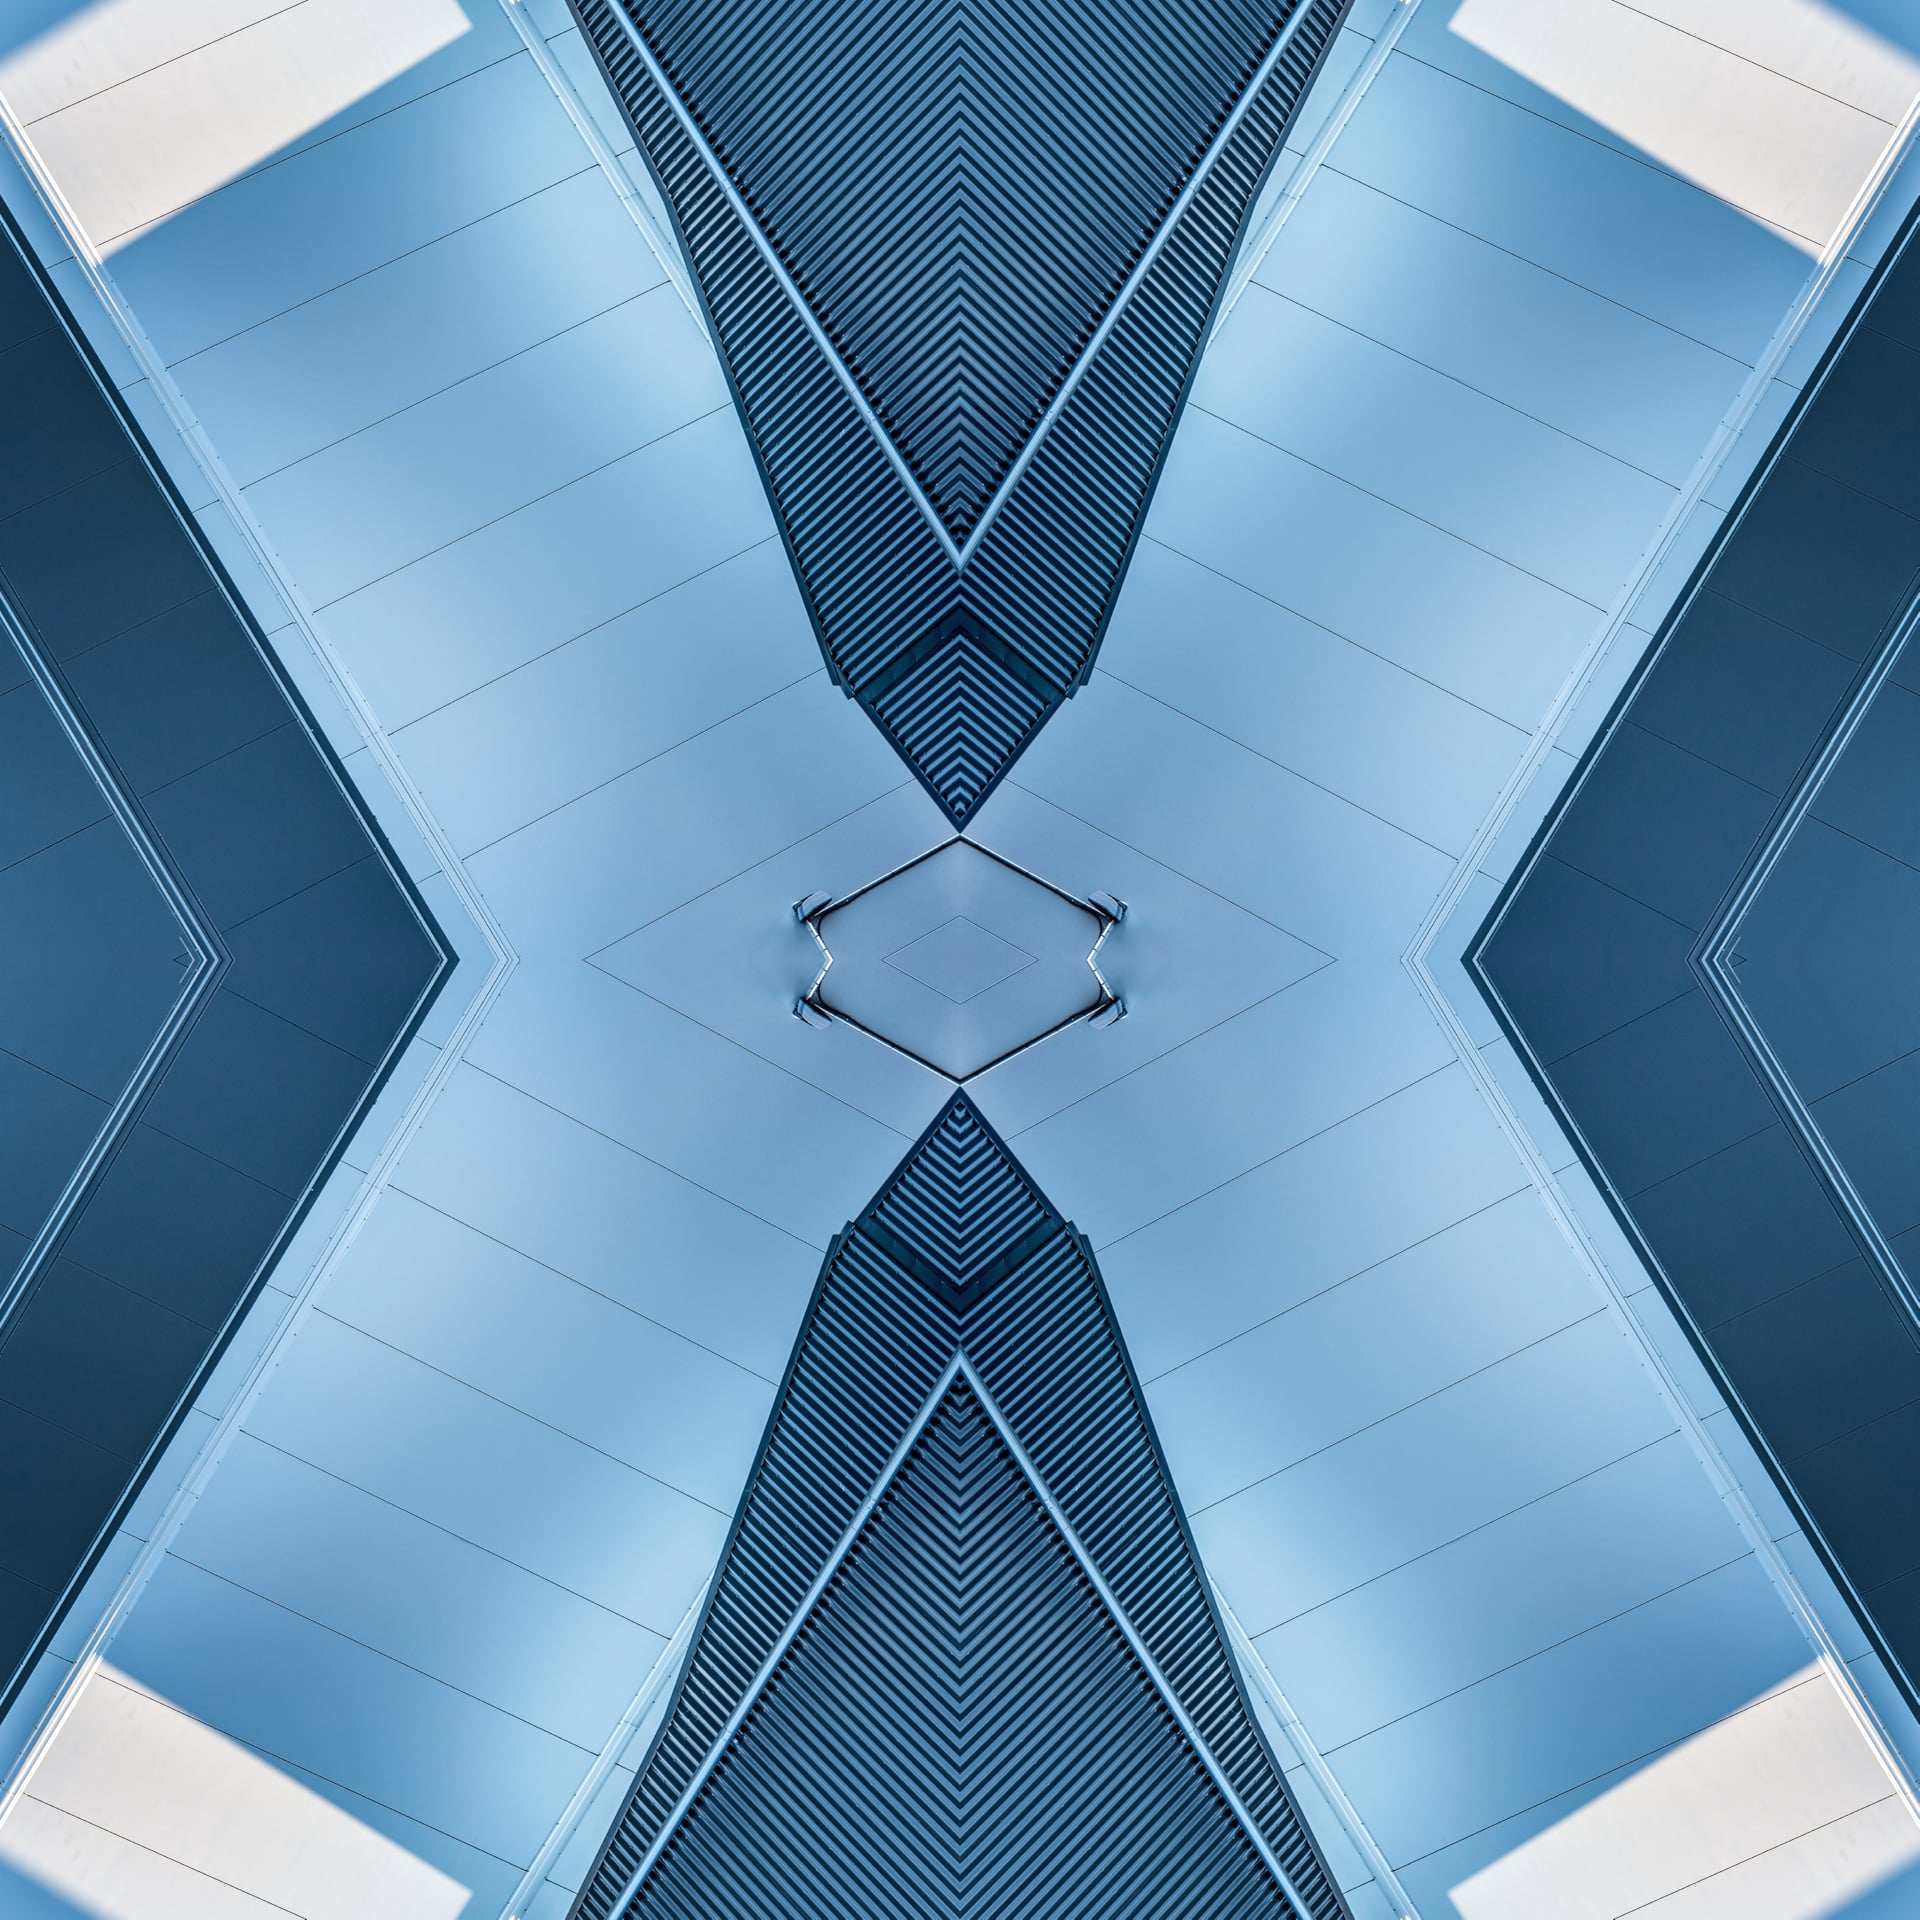 Abstract X Illustration wallpapers HD quality